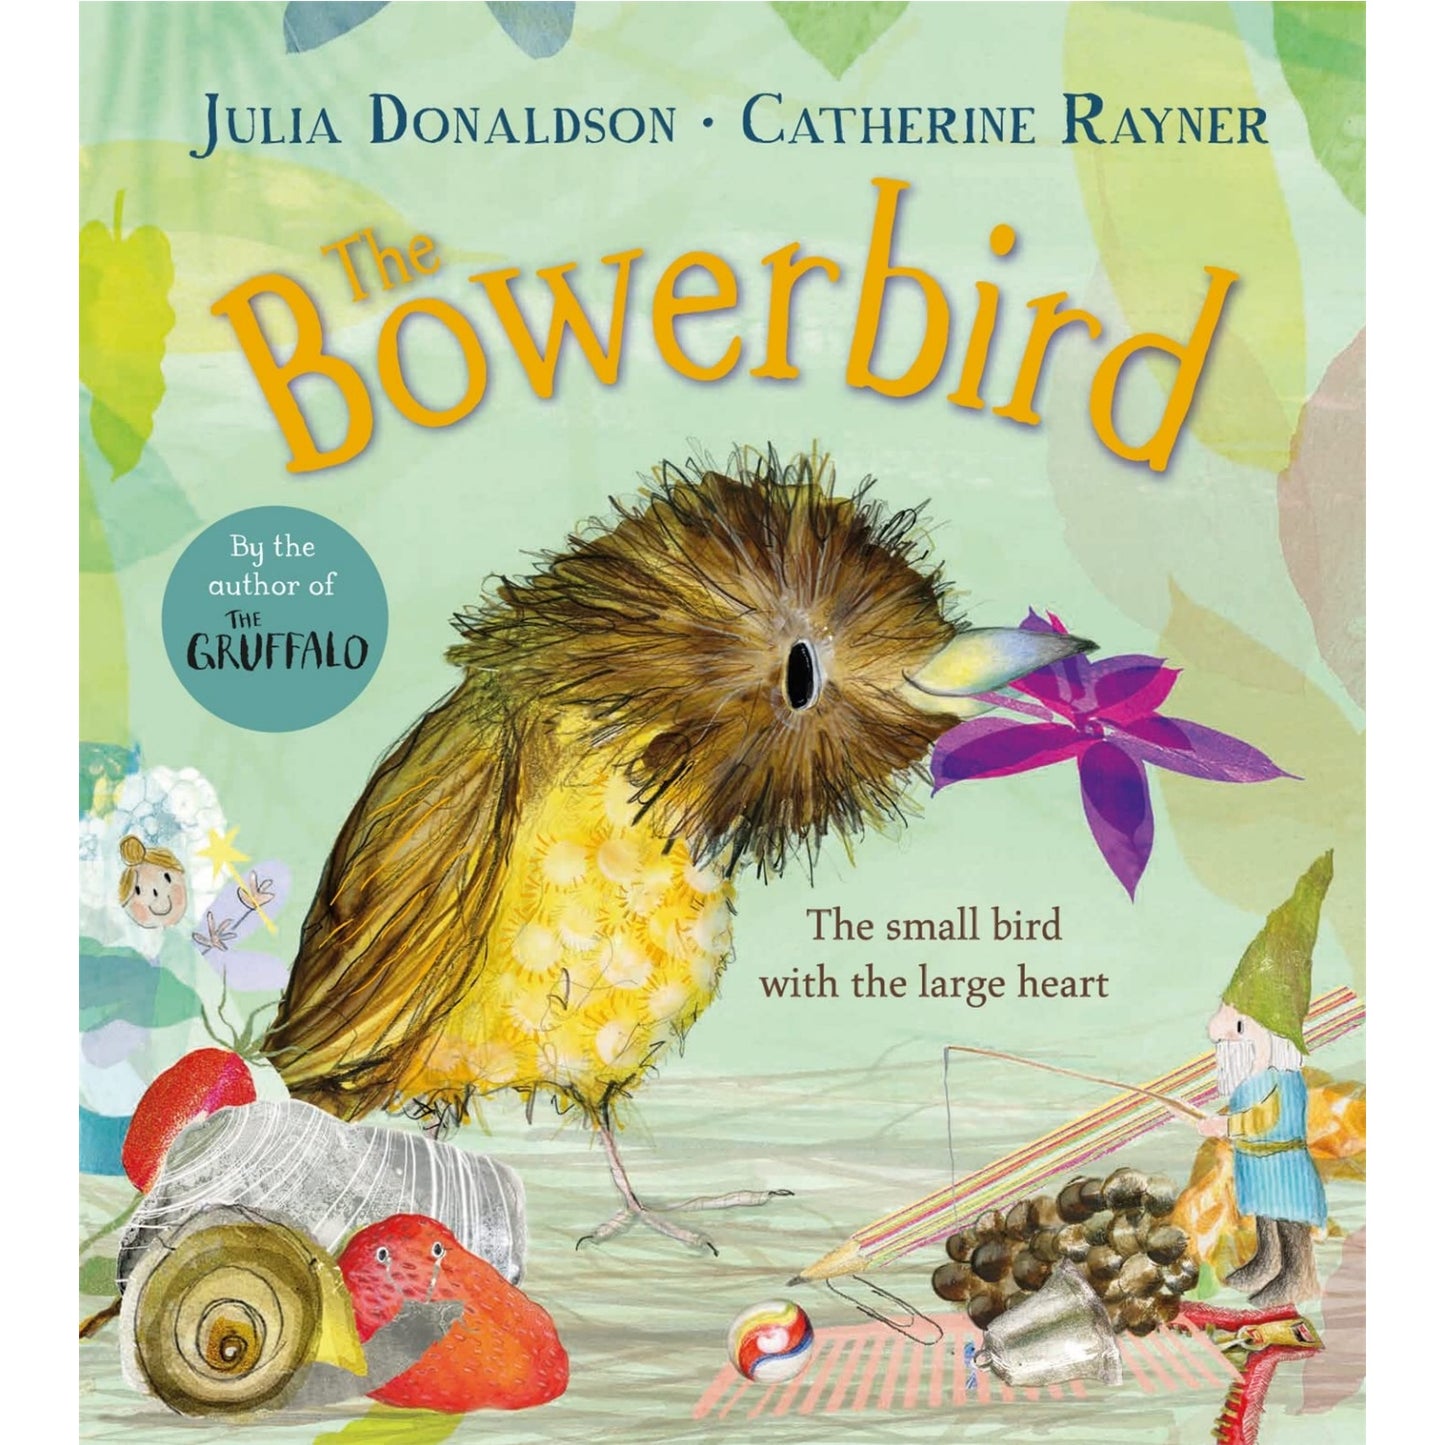 The Bowerbird | Hardcover | Children’s Book on Emotions & Feelings